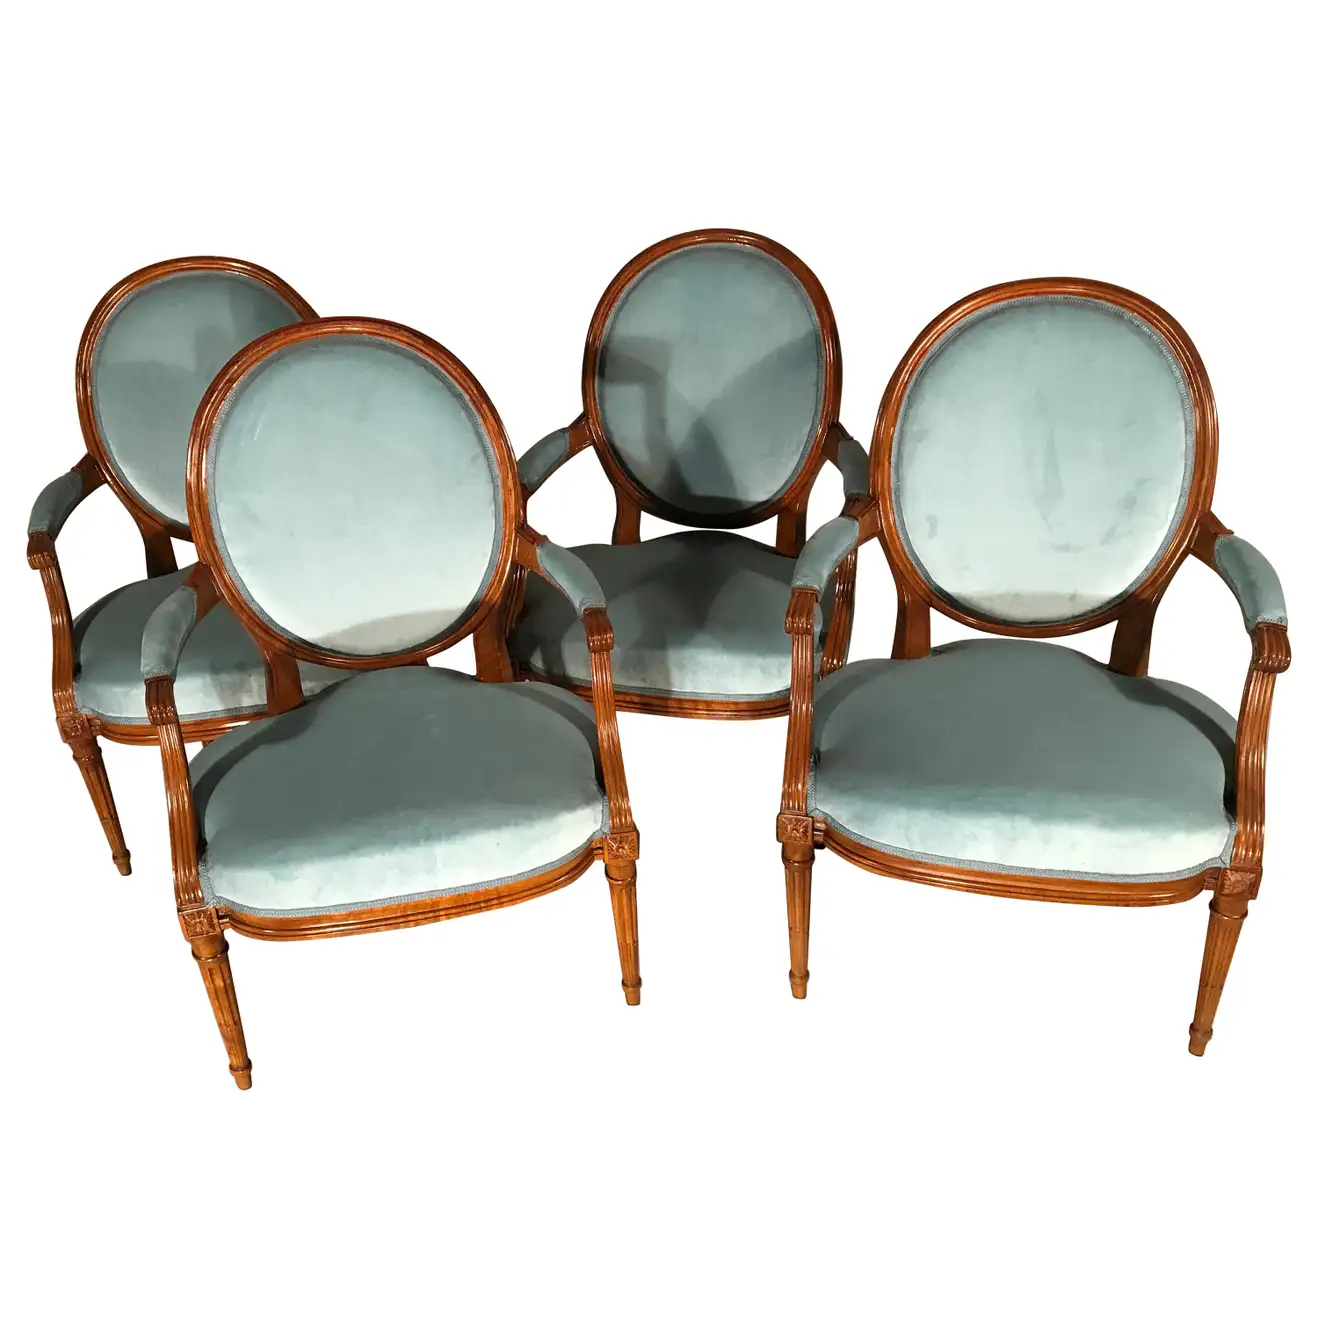 Louis XVI Chairs: A Regal Place to Sit in Any Home